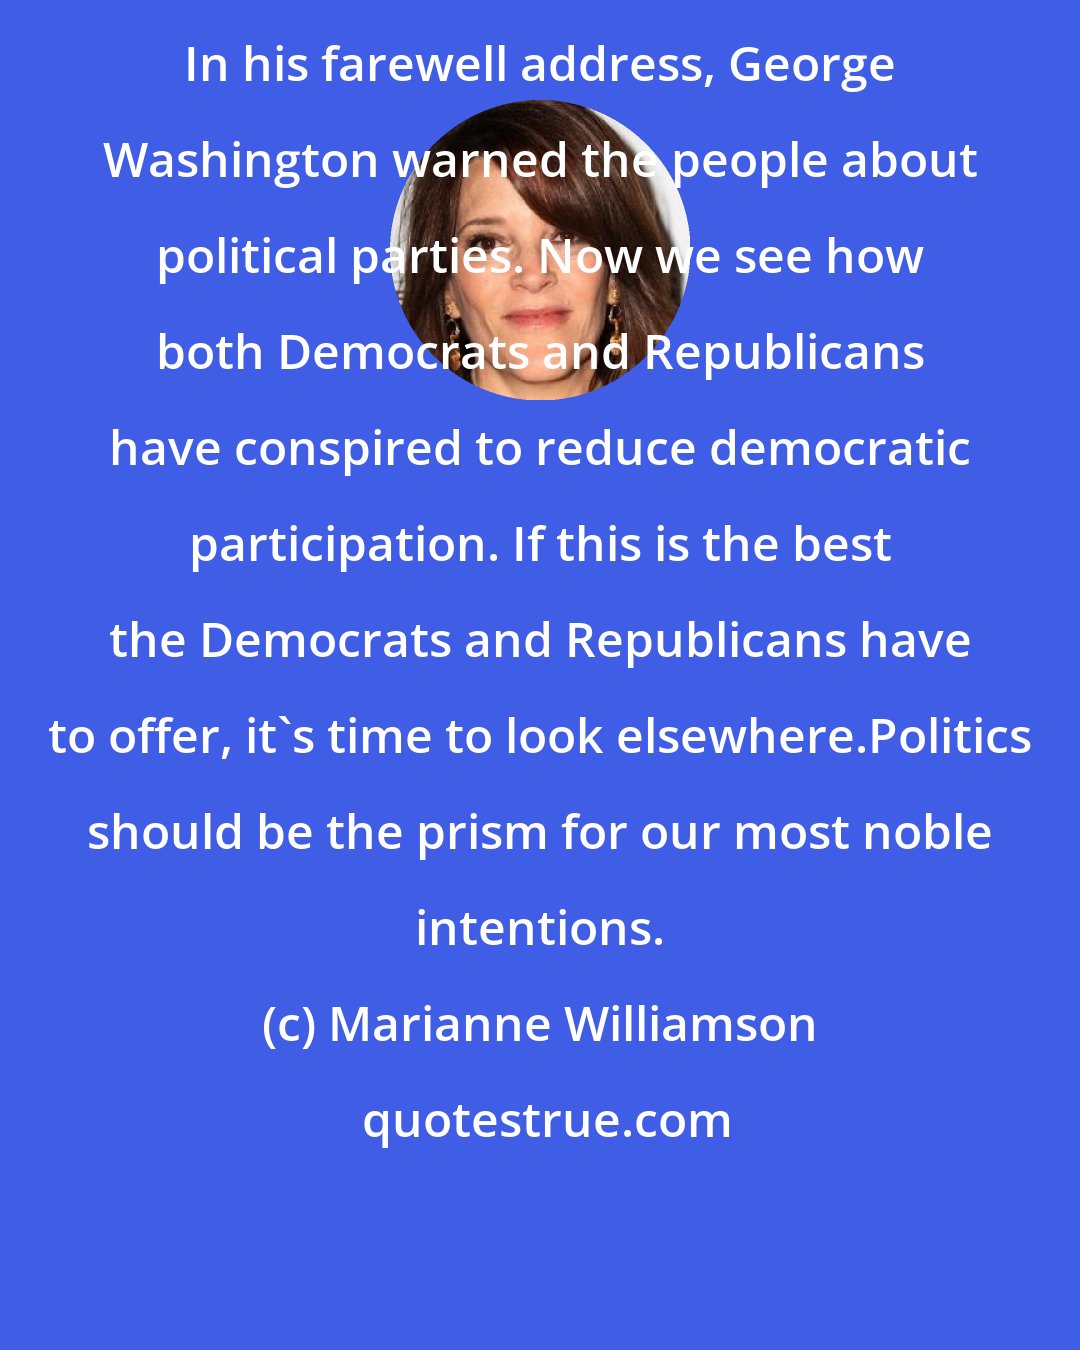 Marianne Williamson: In his farewell address, George Washington warned the people about political parties. Now we see how both Democrats and Republicans have conspired to reduce democratic participation. If this is the best the Democrats and Republicans have to offer, it's time to look elsewhere.Politics should be the prism for our most noble intentions.